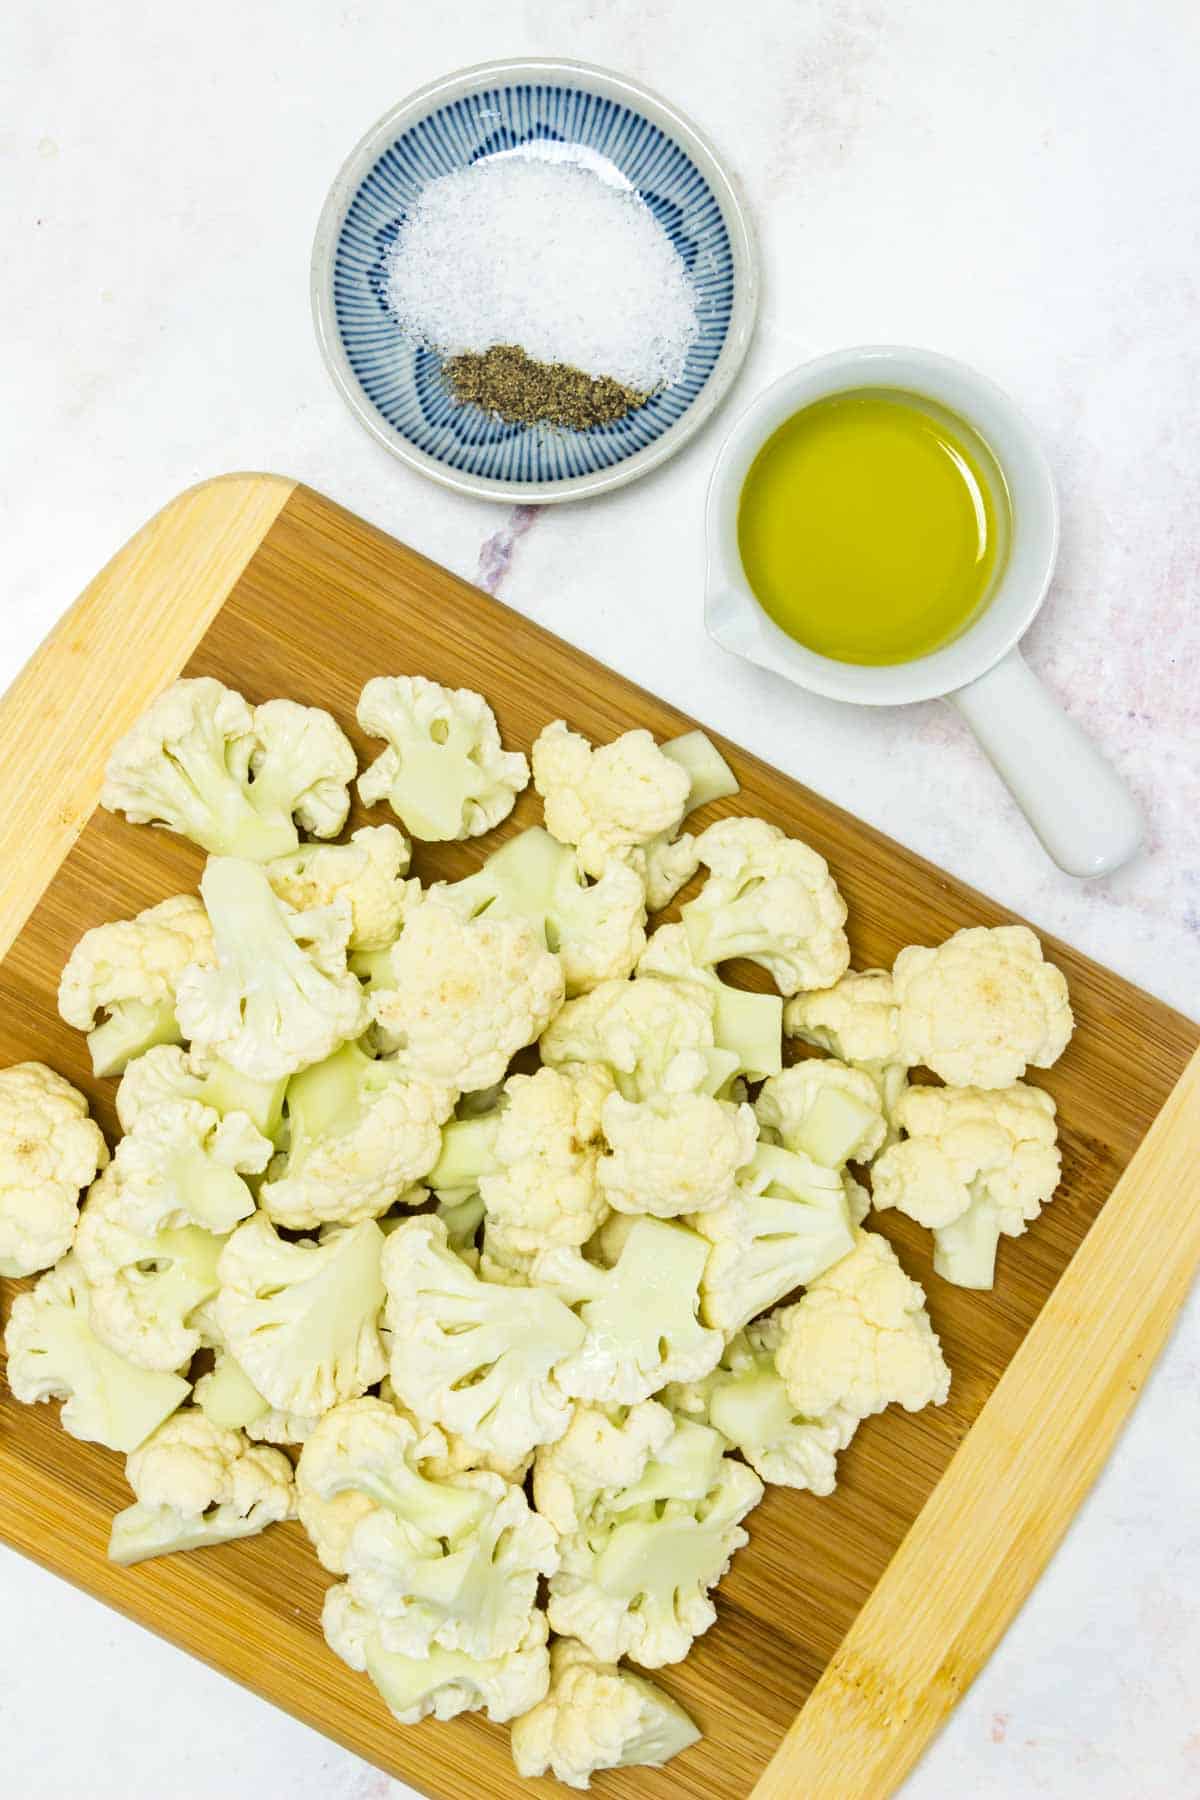 ingredients needed to make roasted cauliflower are shown: cauliflower, olive oil, and salt and pepper.